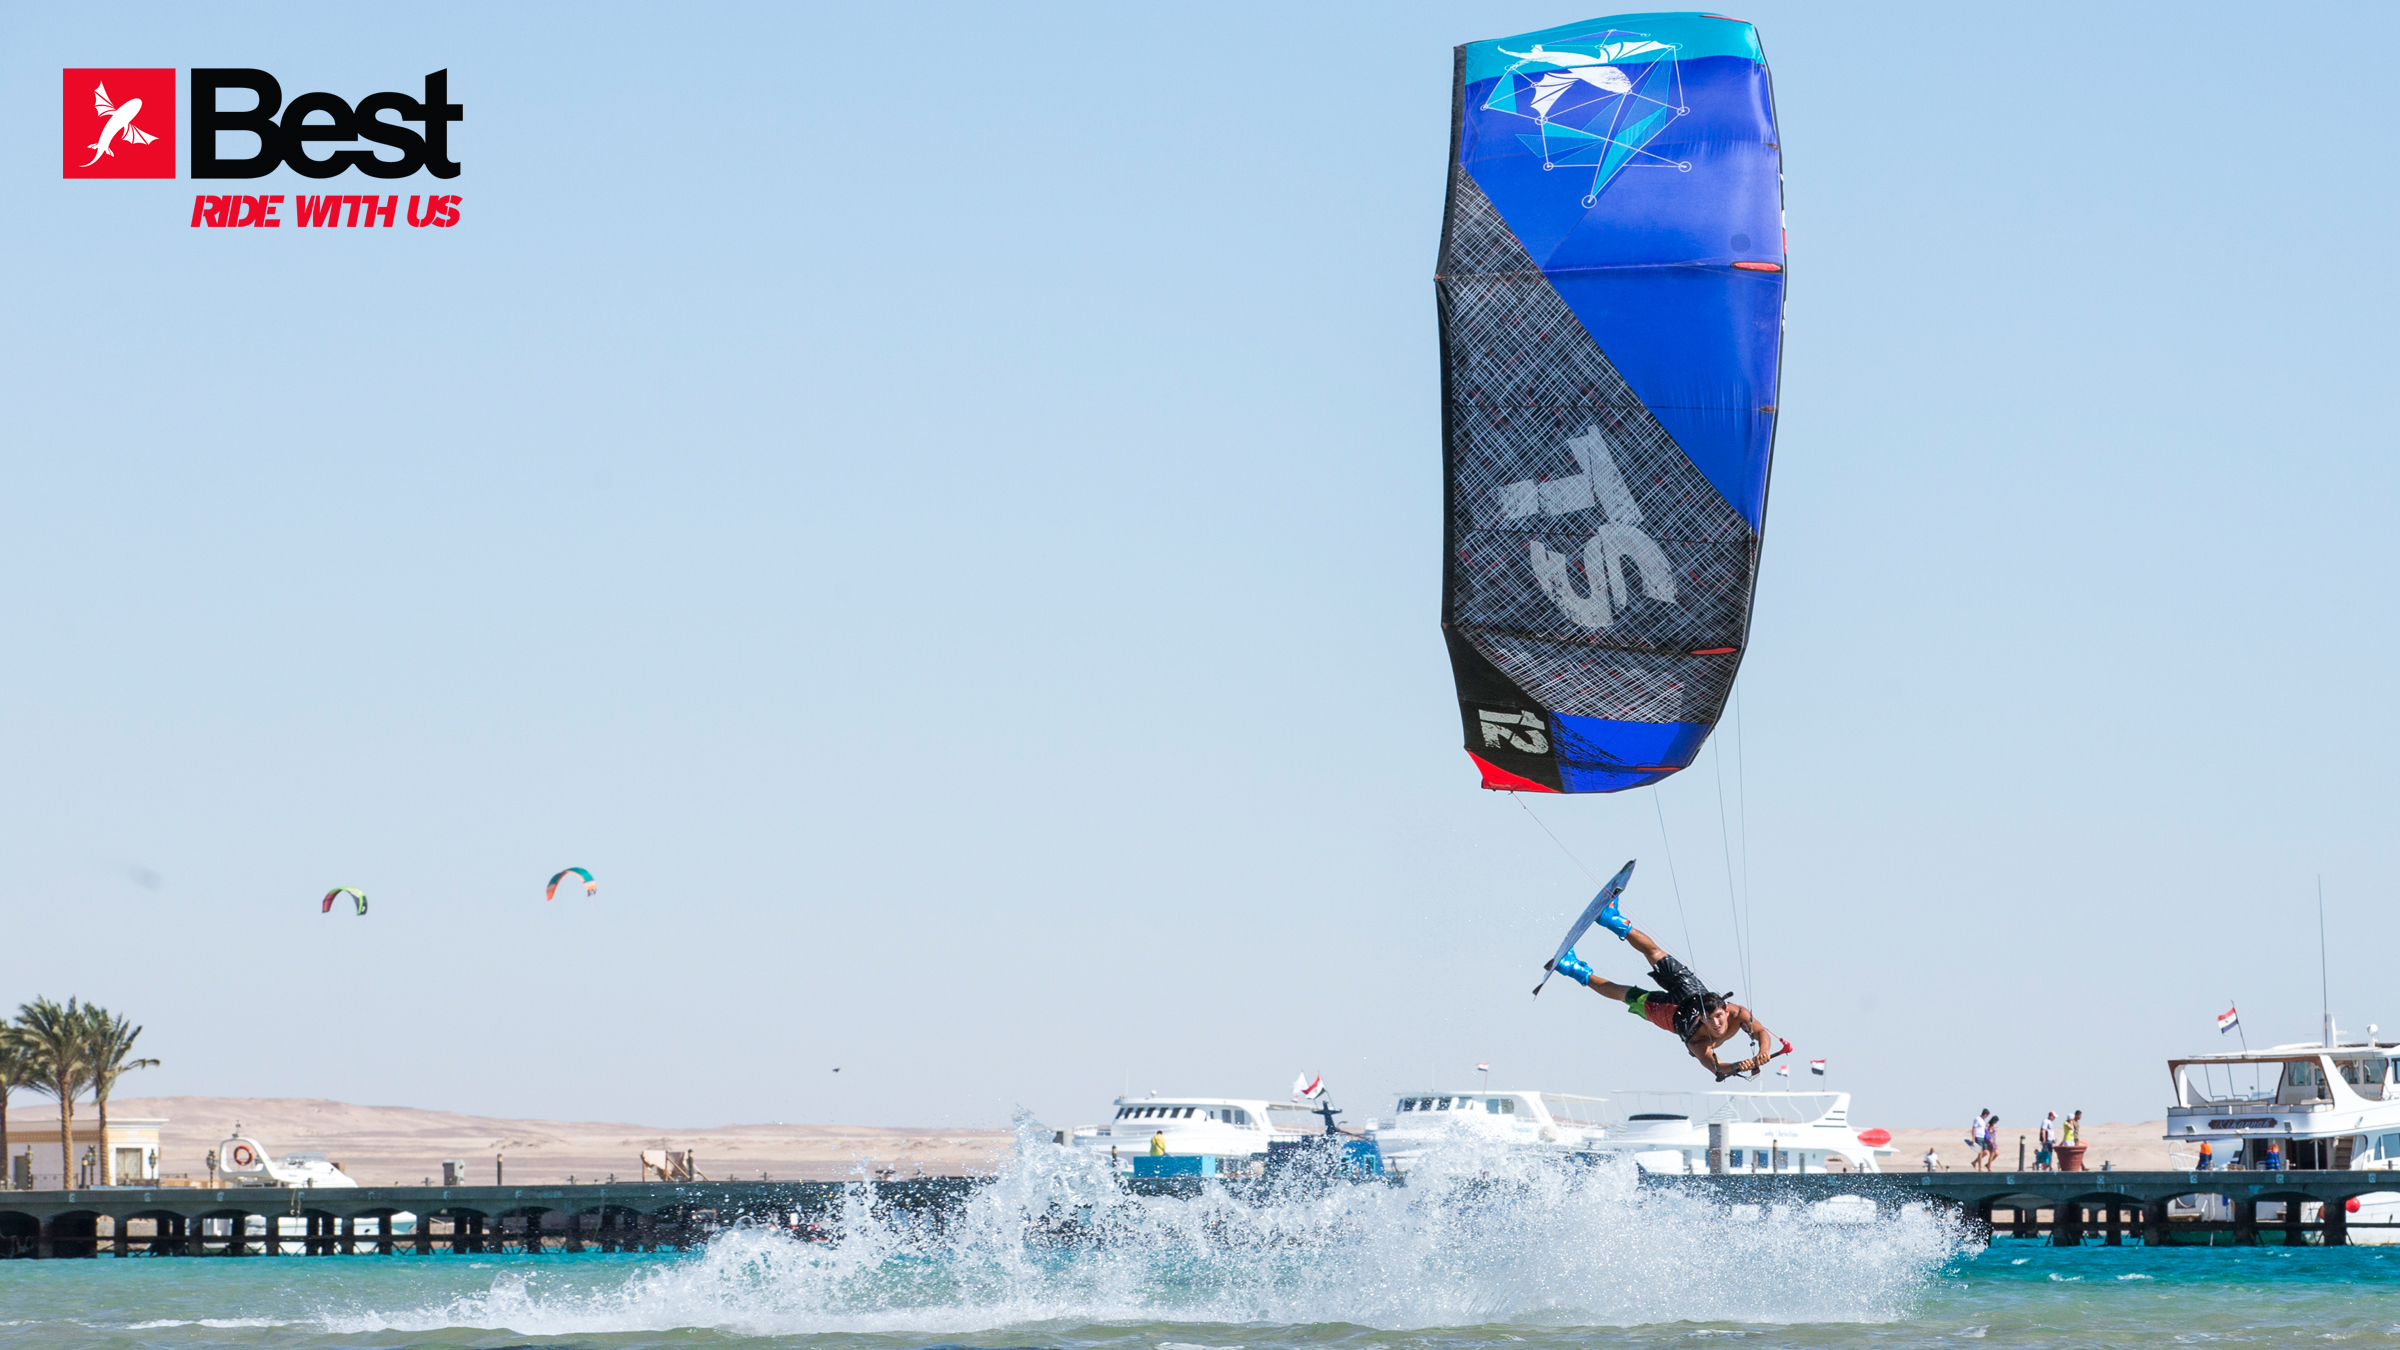 kitesurf wallpaper image - Alexandre Neto with a cool raily on the 2015 Best Kiteboarding TS kite - in resolution: High Definition - HD 16:9 2400 X 1350